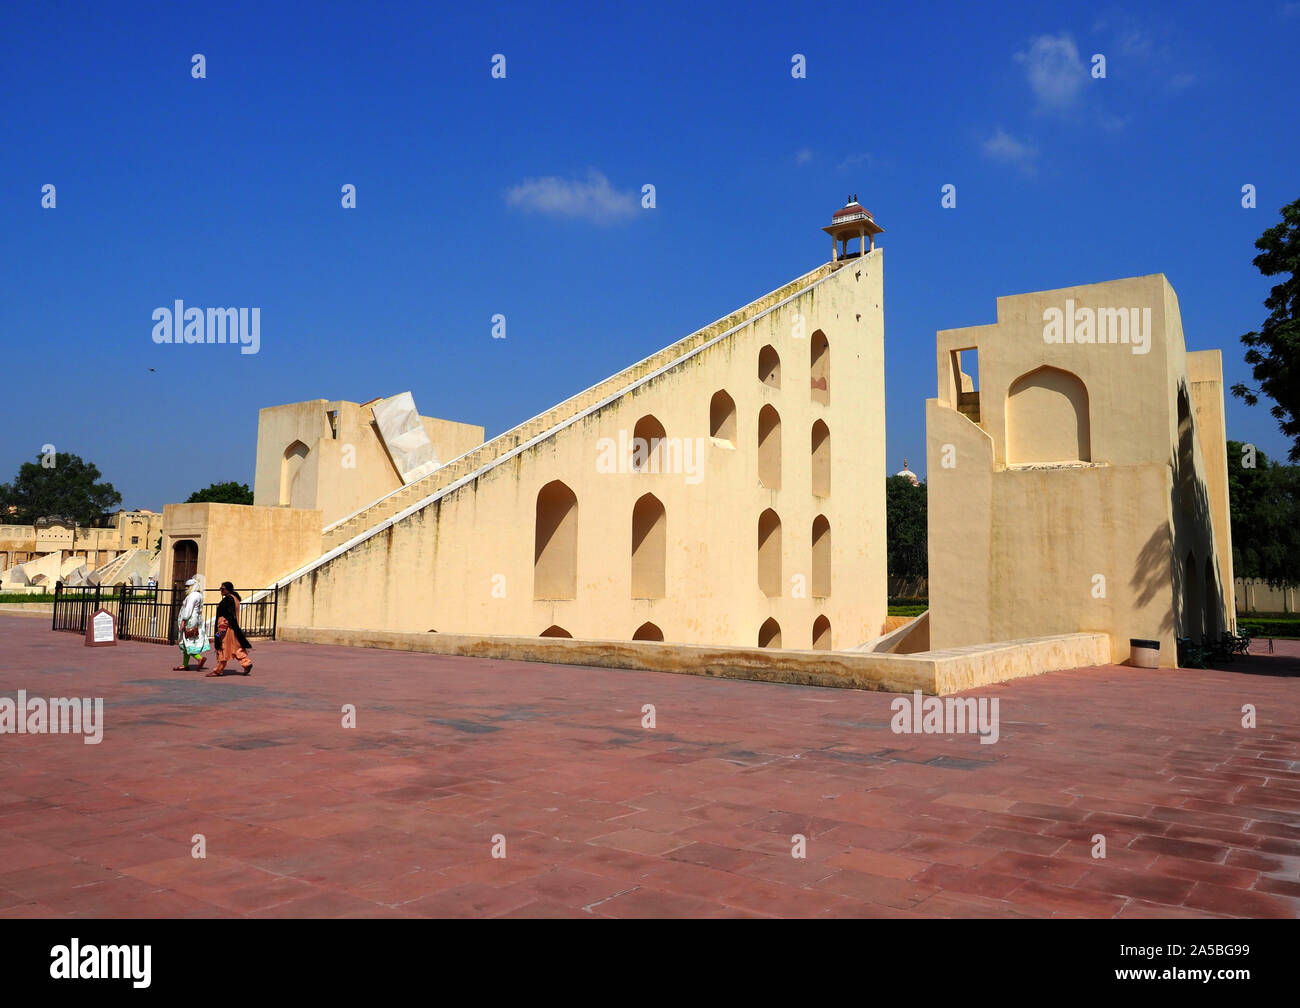 The giant sundial at the Jantar Mantar Astronomical Observatory in Jaipur, Rajasthan, India. Stock Photo